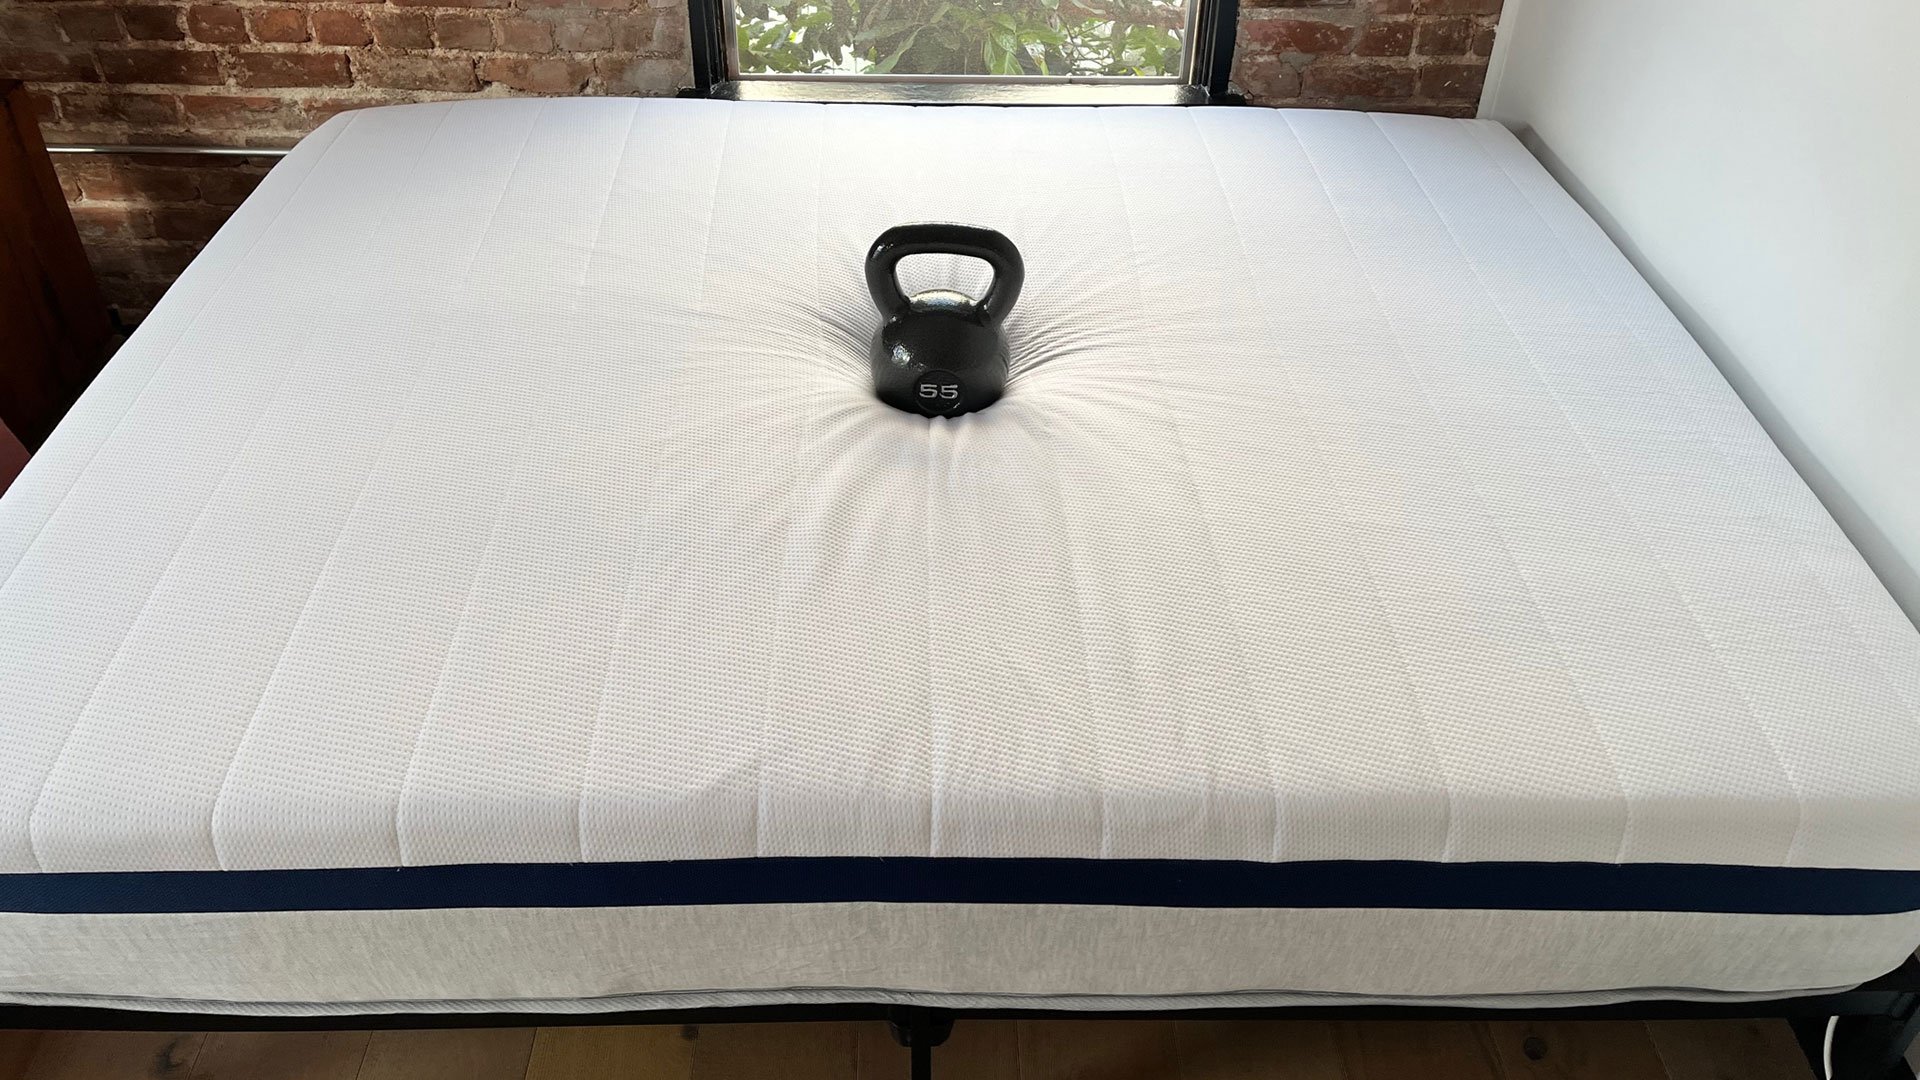 Photo of Helix Midnight mattress in a bedroom, with a weight on it, and a wine glass stood upright on the mattress surface nearby